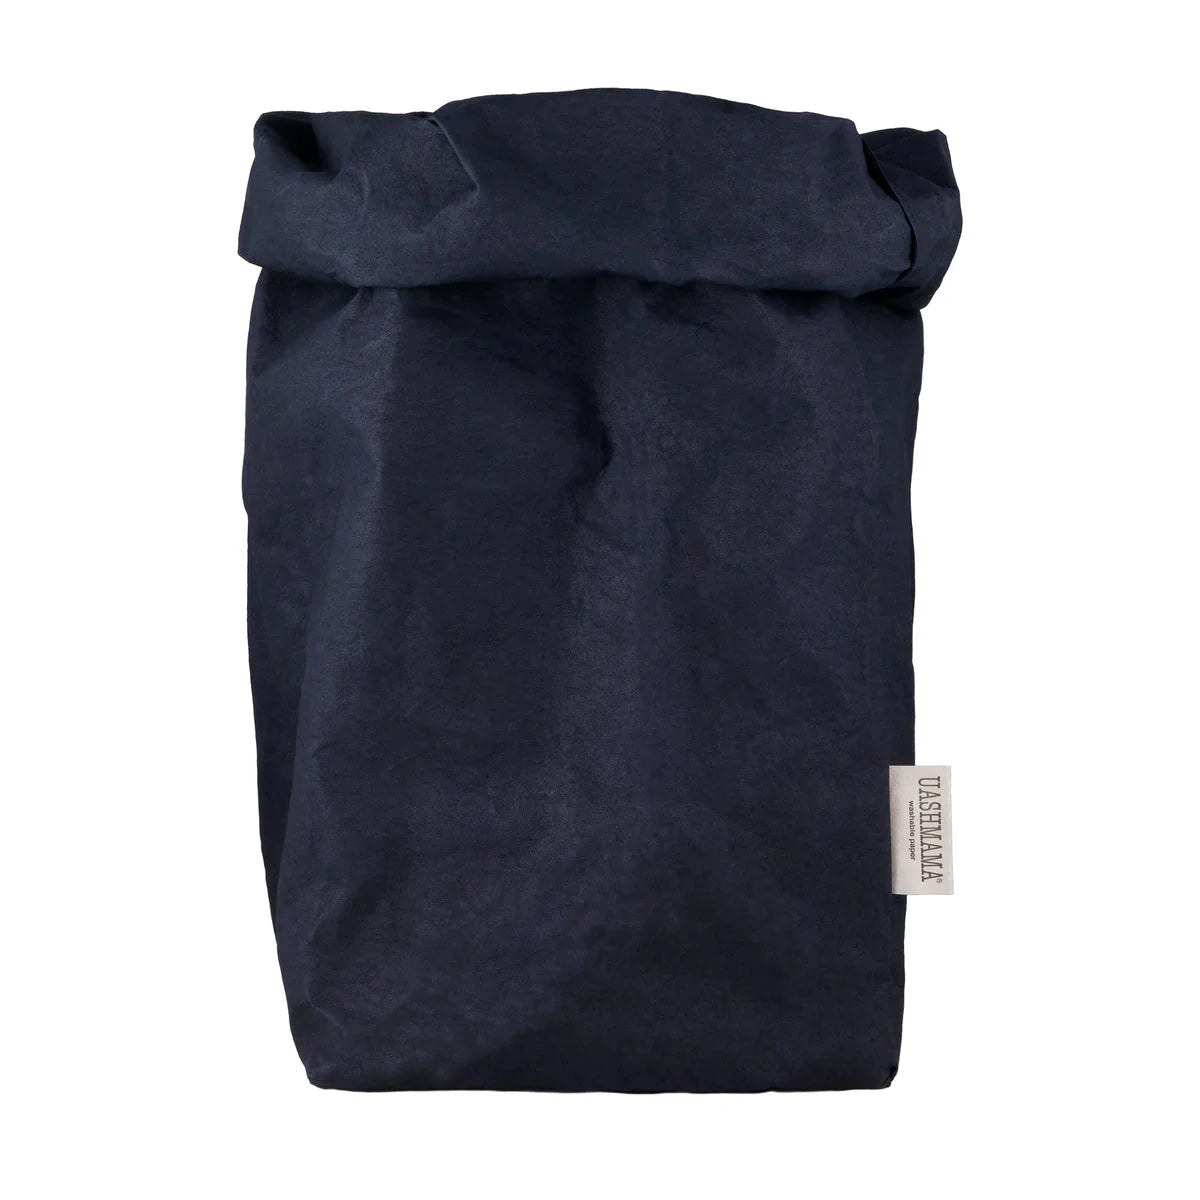 A washable paper bag is shown. The bag is rolled down at the top and features a UASHMAMA logo label on the bottom left corner. The bag pictured is the extra extra large size in dark blue.